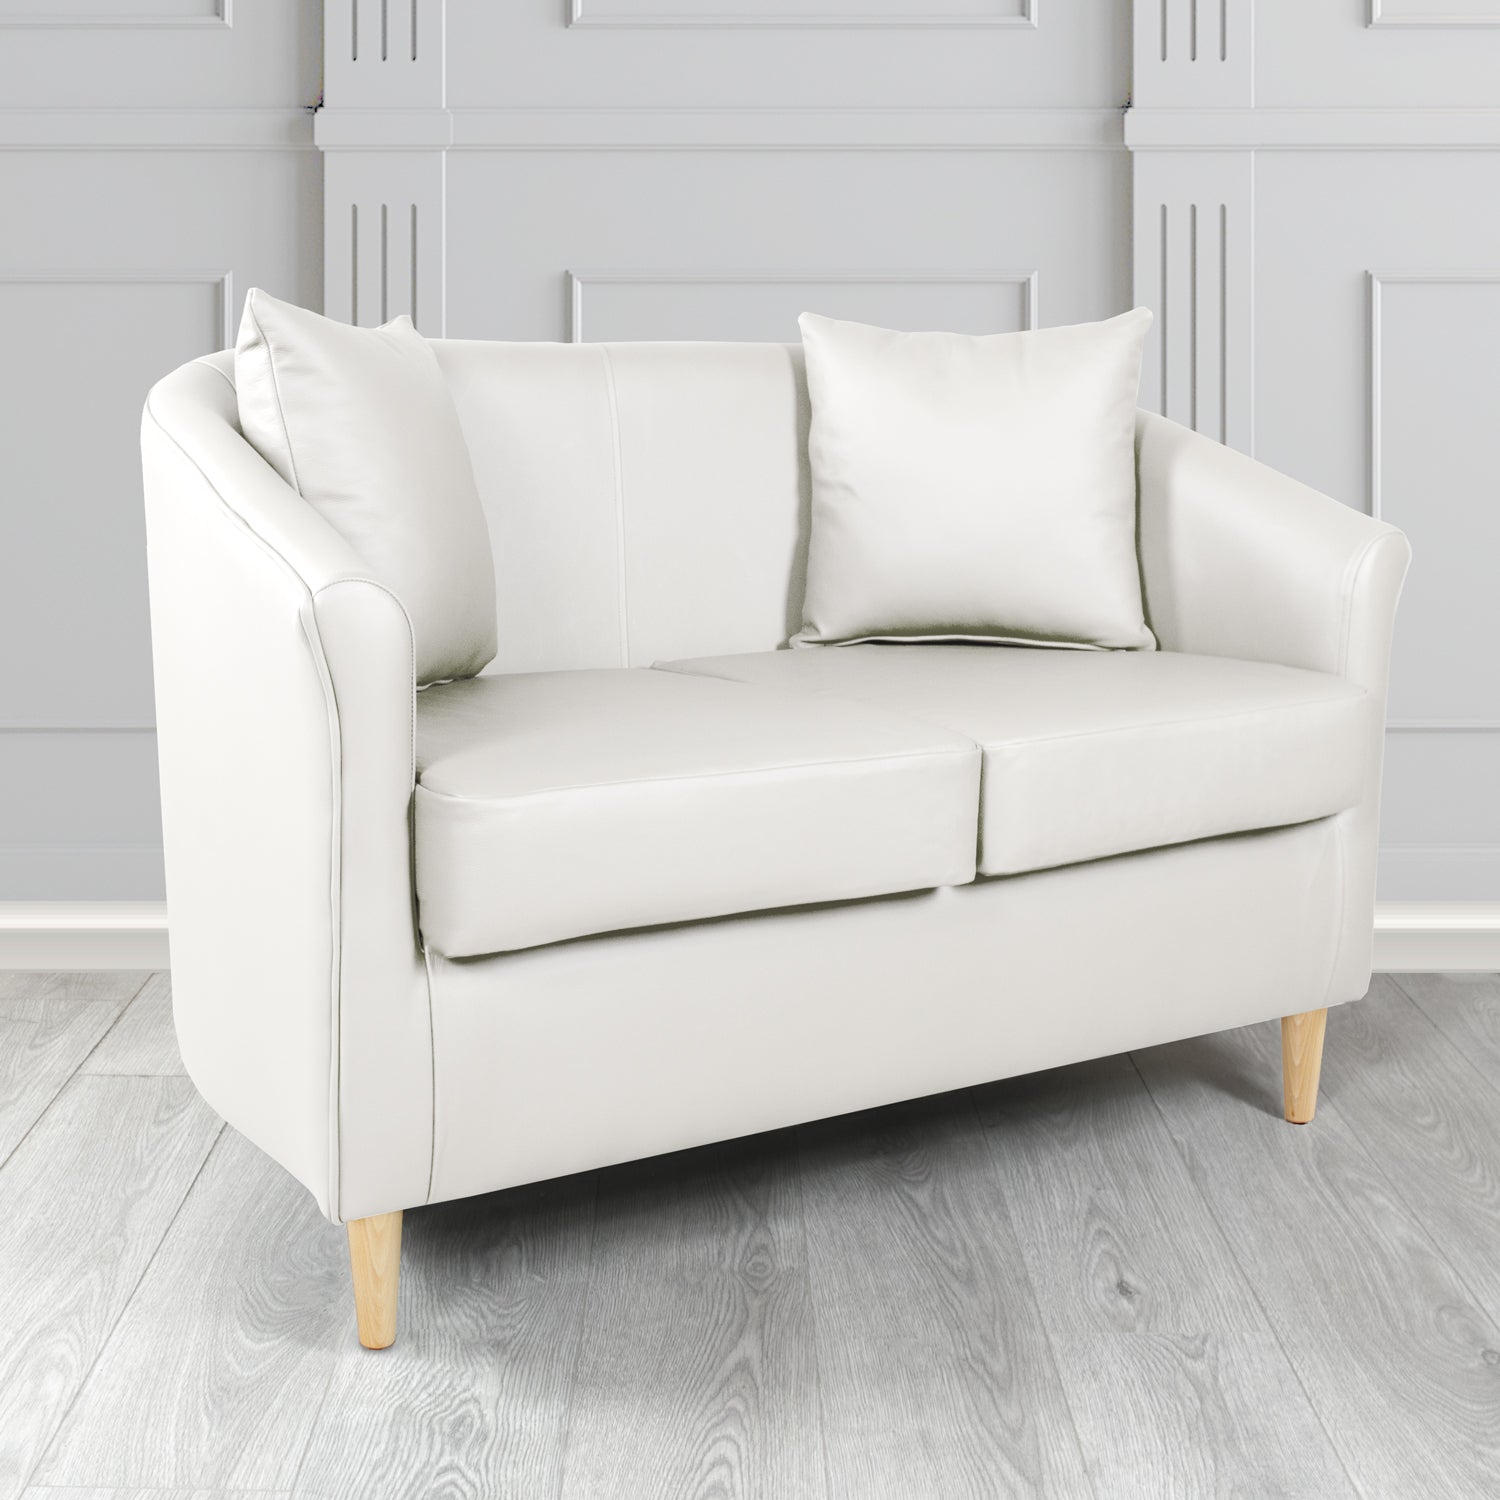 St Tropez 2 Seater Tub Sofa in Madrid White Faux Leather - The Tub Chair Shop